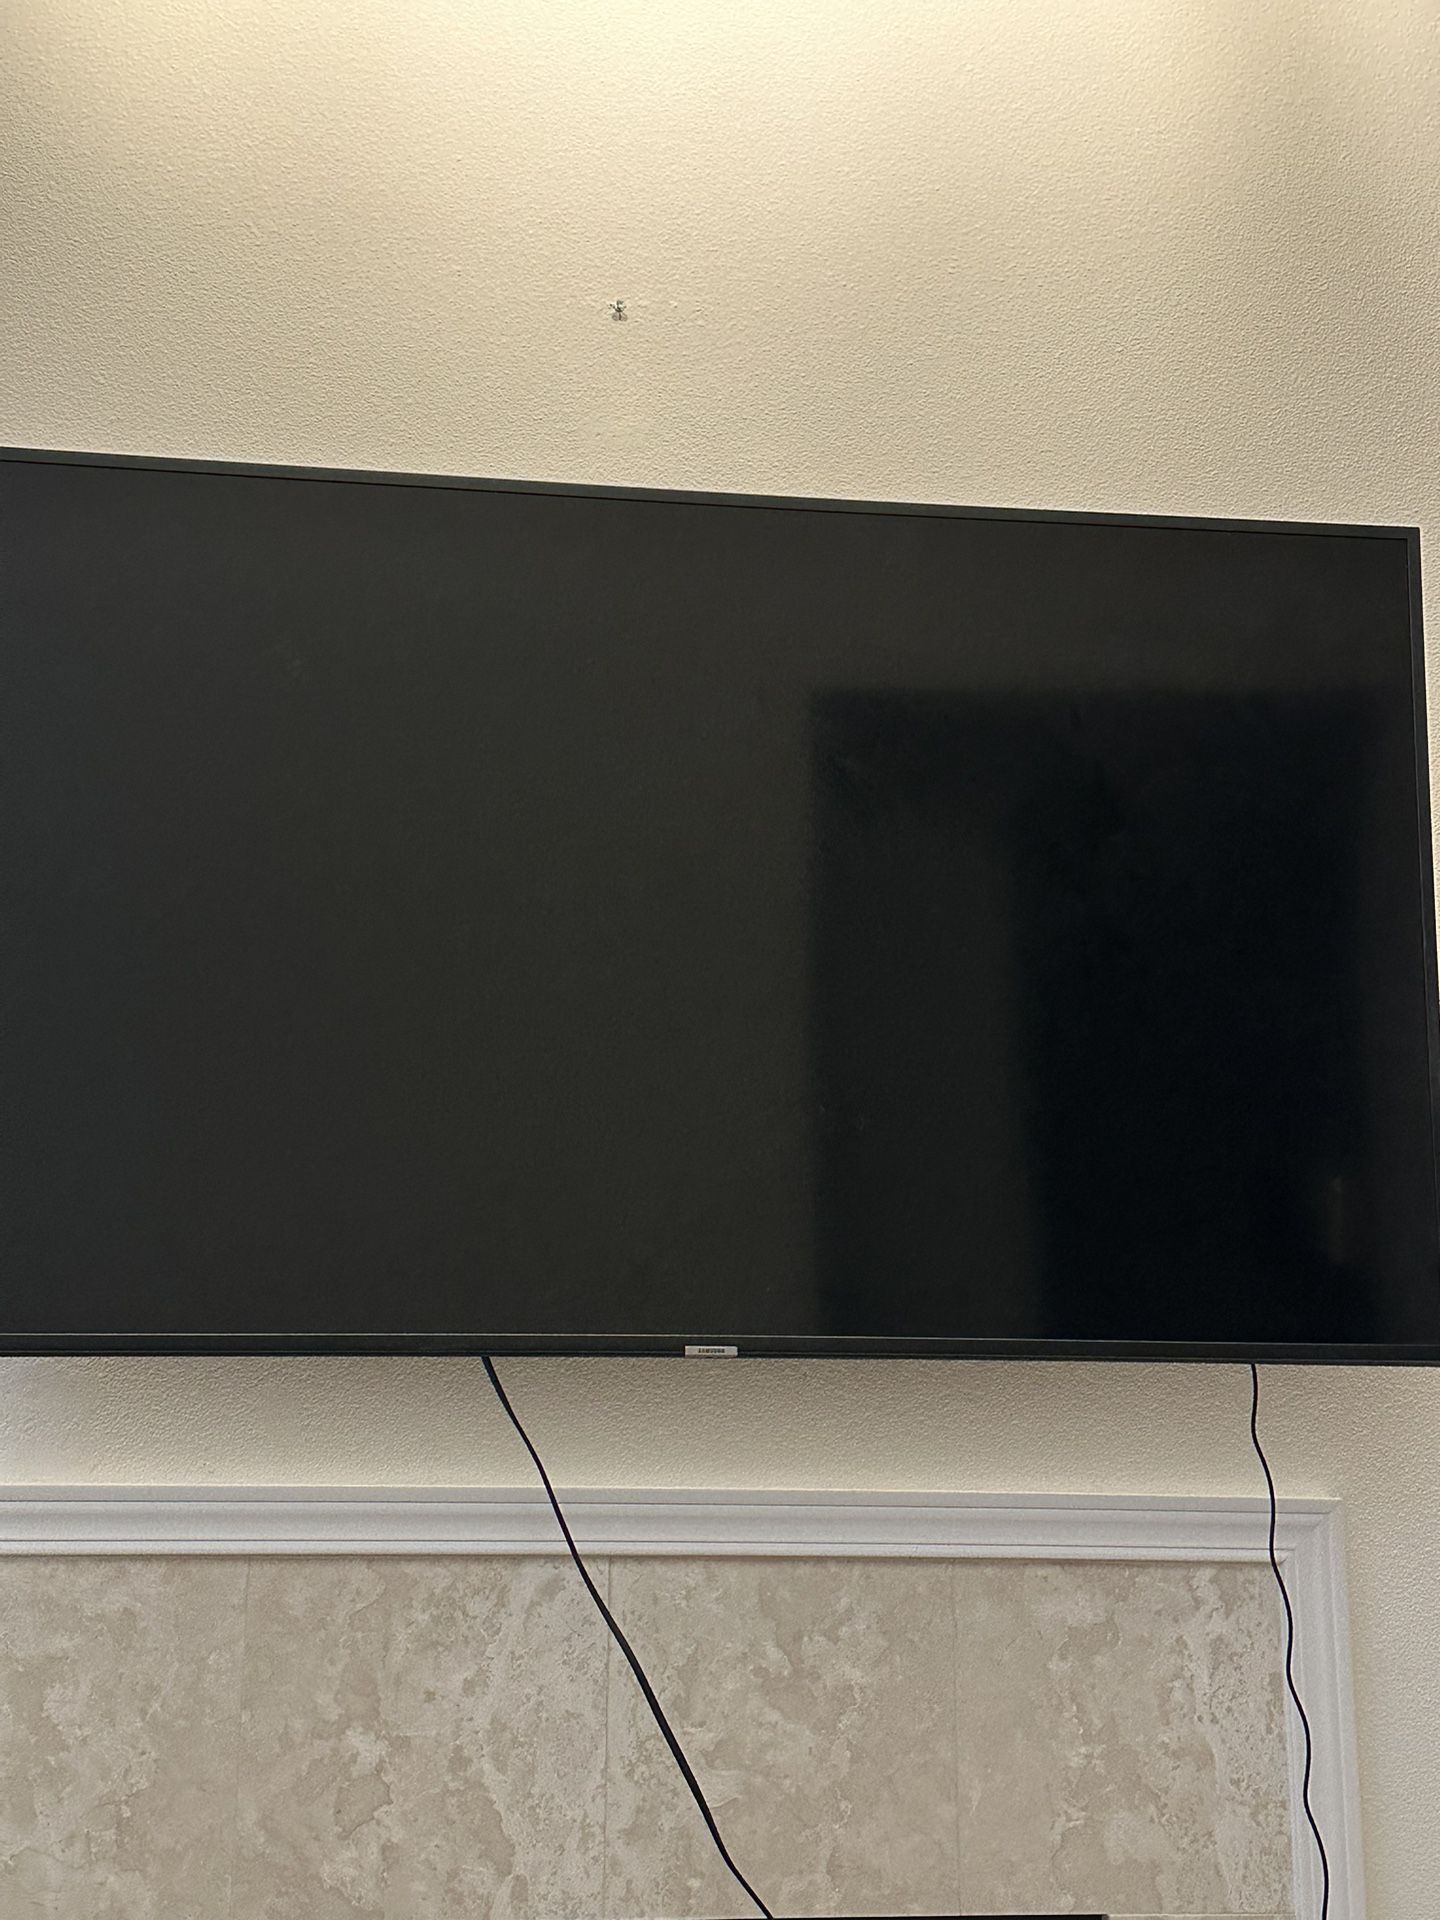 Samsung Tv 55’ With Wall Mount Bracket. 